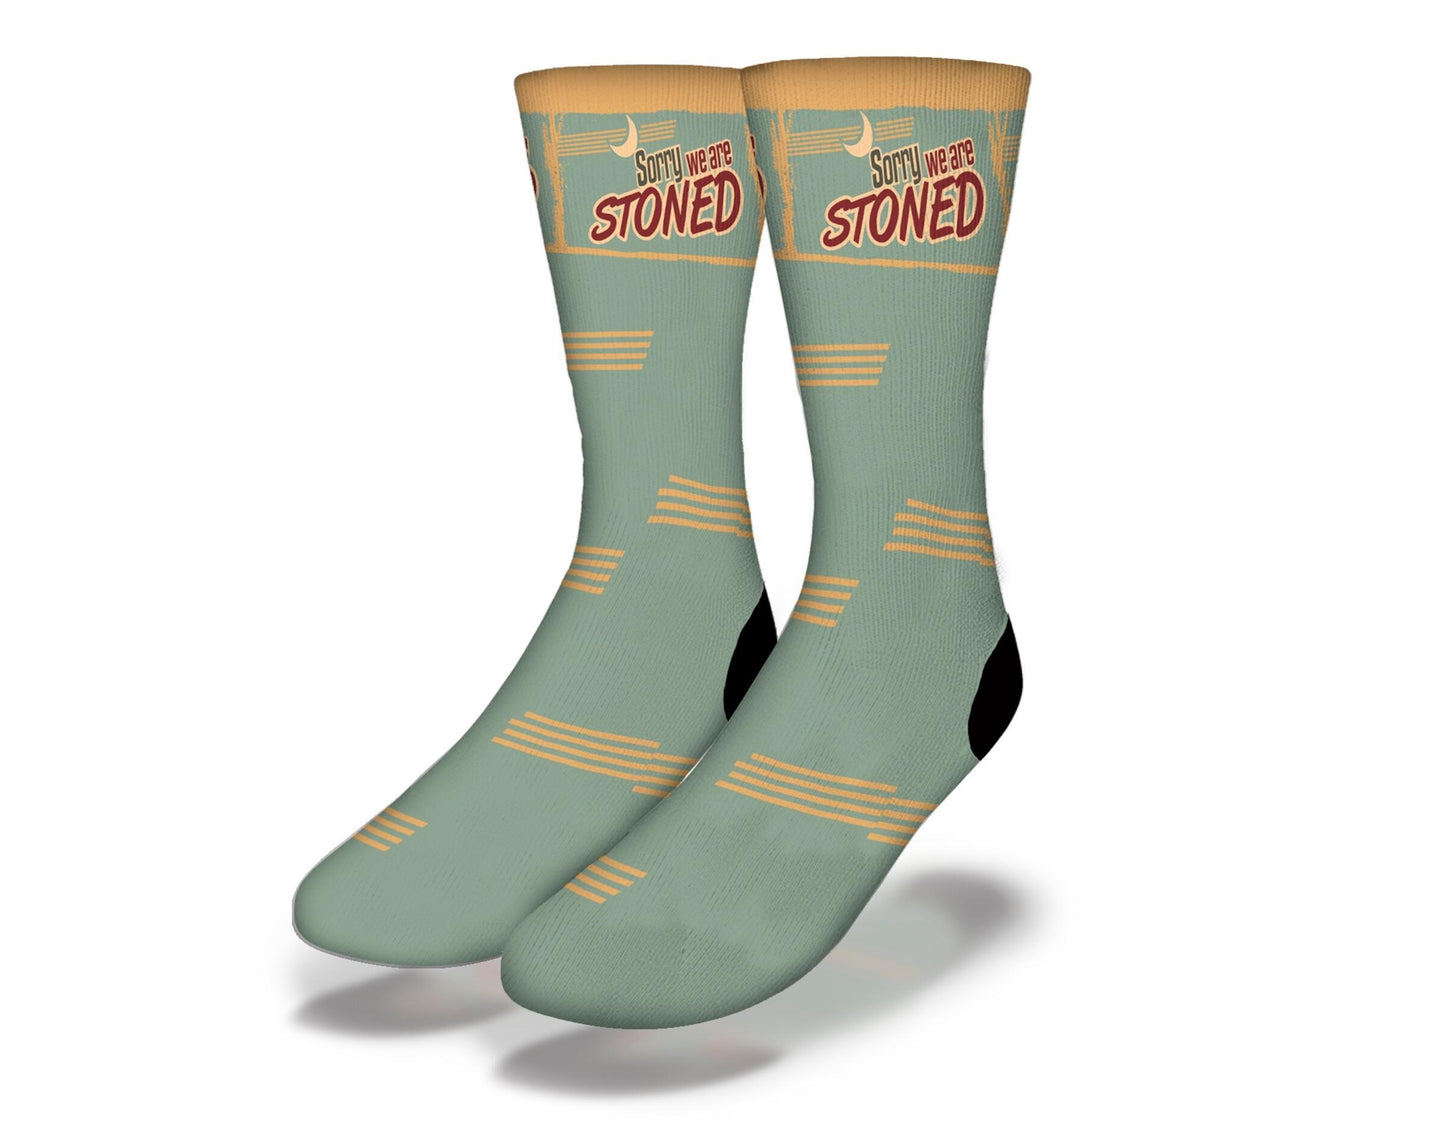 SORRY WE ARE STONED Funny Weed Socks